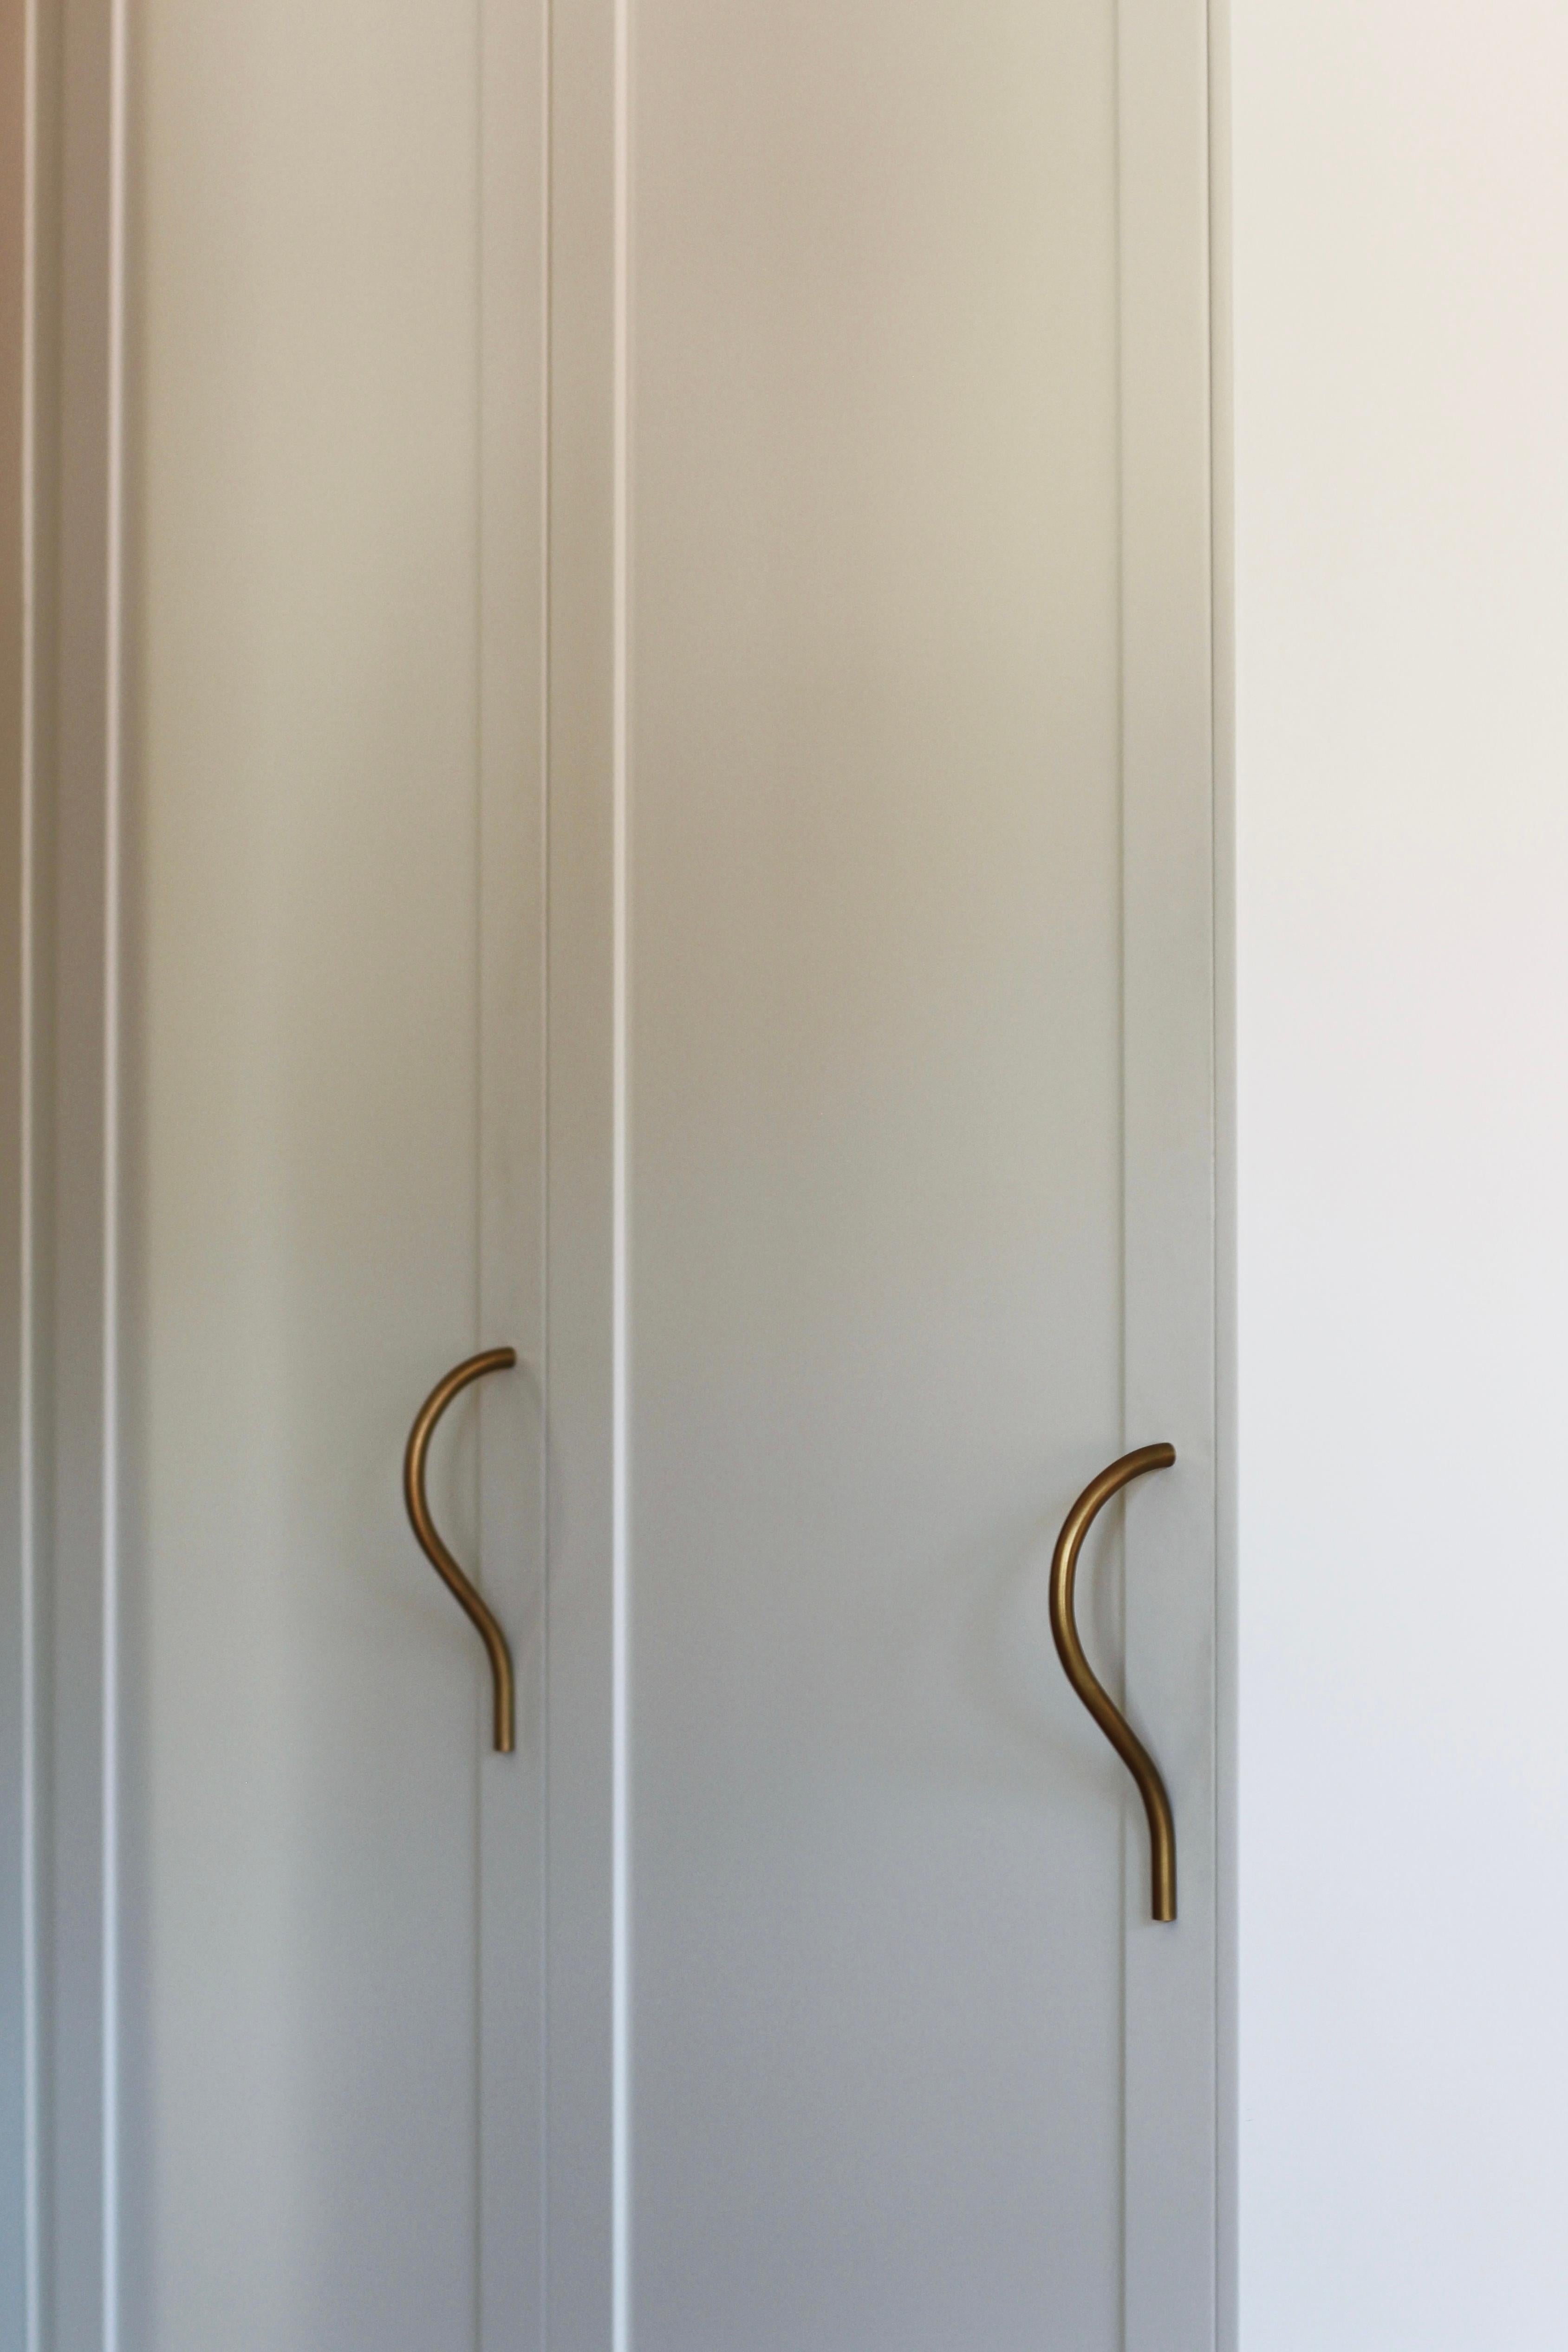 Door Handle or Knob 'Doyen' by Spaces Within, Dark Brass

Dimensions
Height: 230 mm
Width: 12 mm
Depth: 70 mm

Weight: 300 g

DOYEN is a prominent handle with an elegantly slanted curve. This larger handle is beautiful as a statement piece on tall